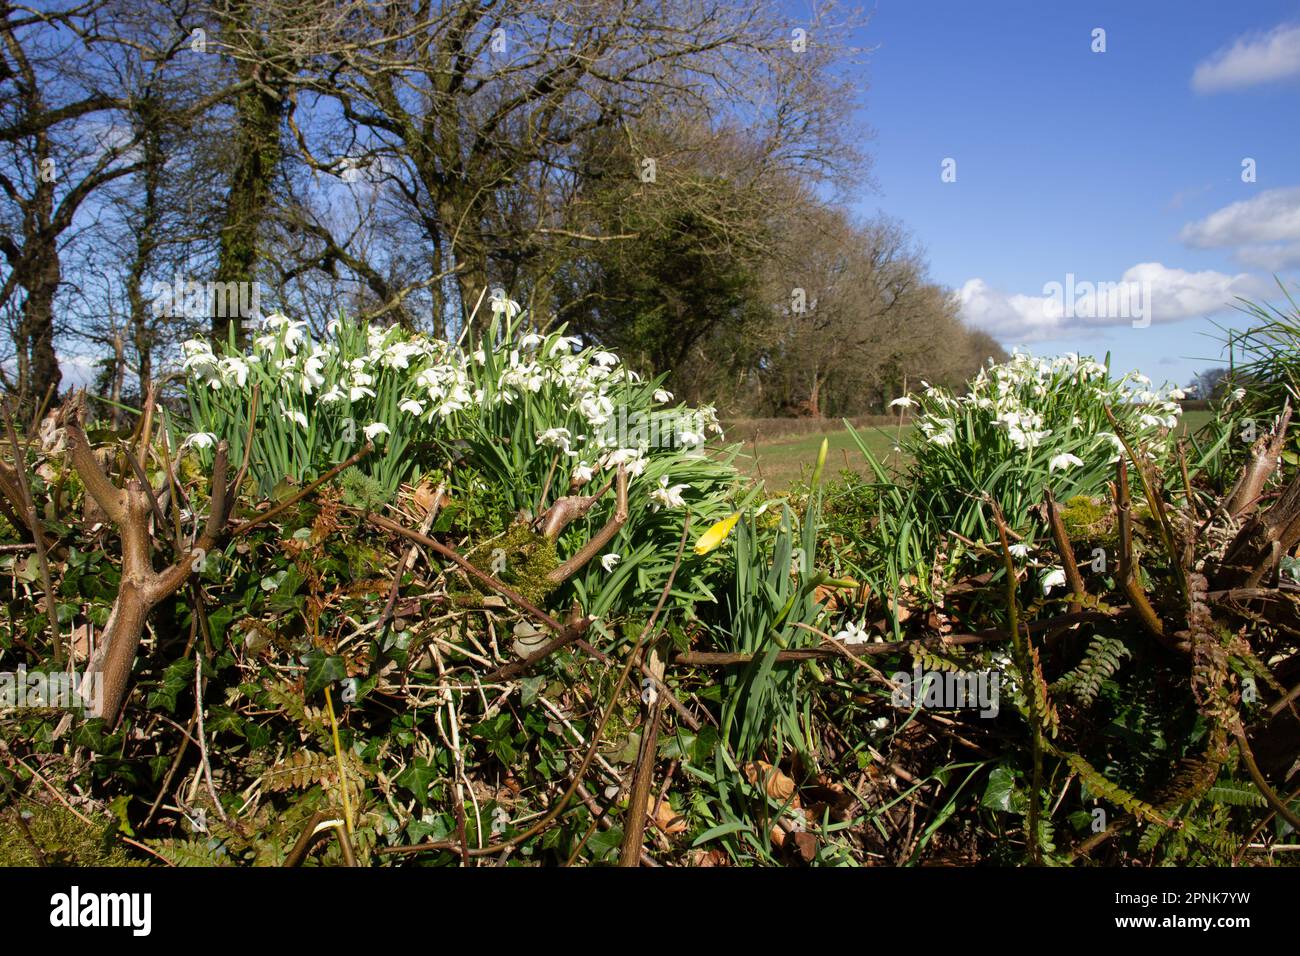 Snowdrops, Galanthus flowering on the top of a Devon bank with trees and a sky and white clouds Stock Photo